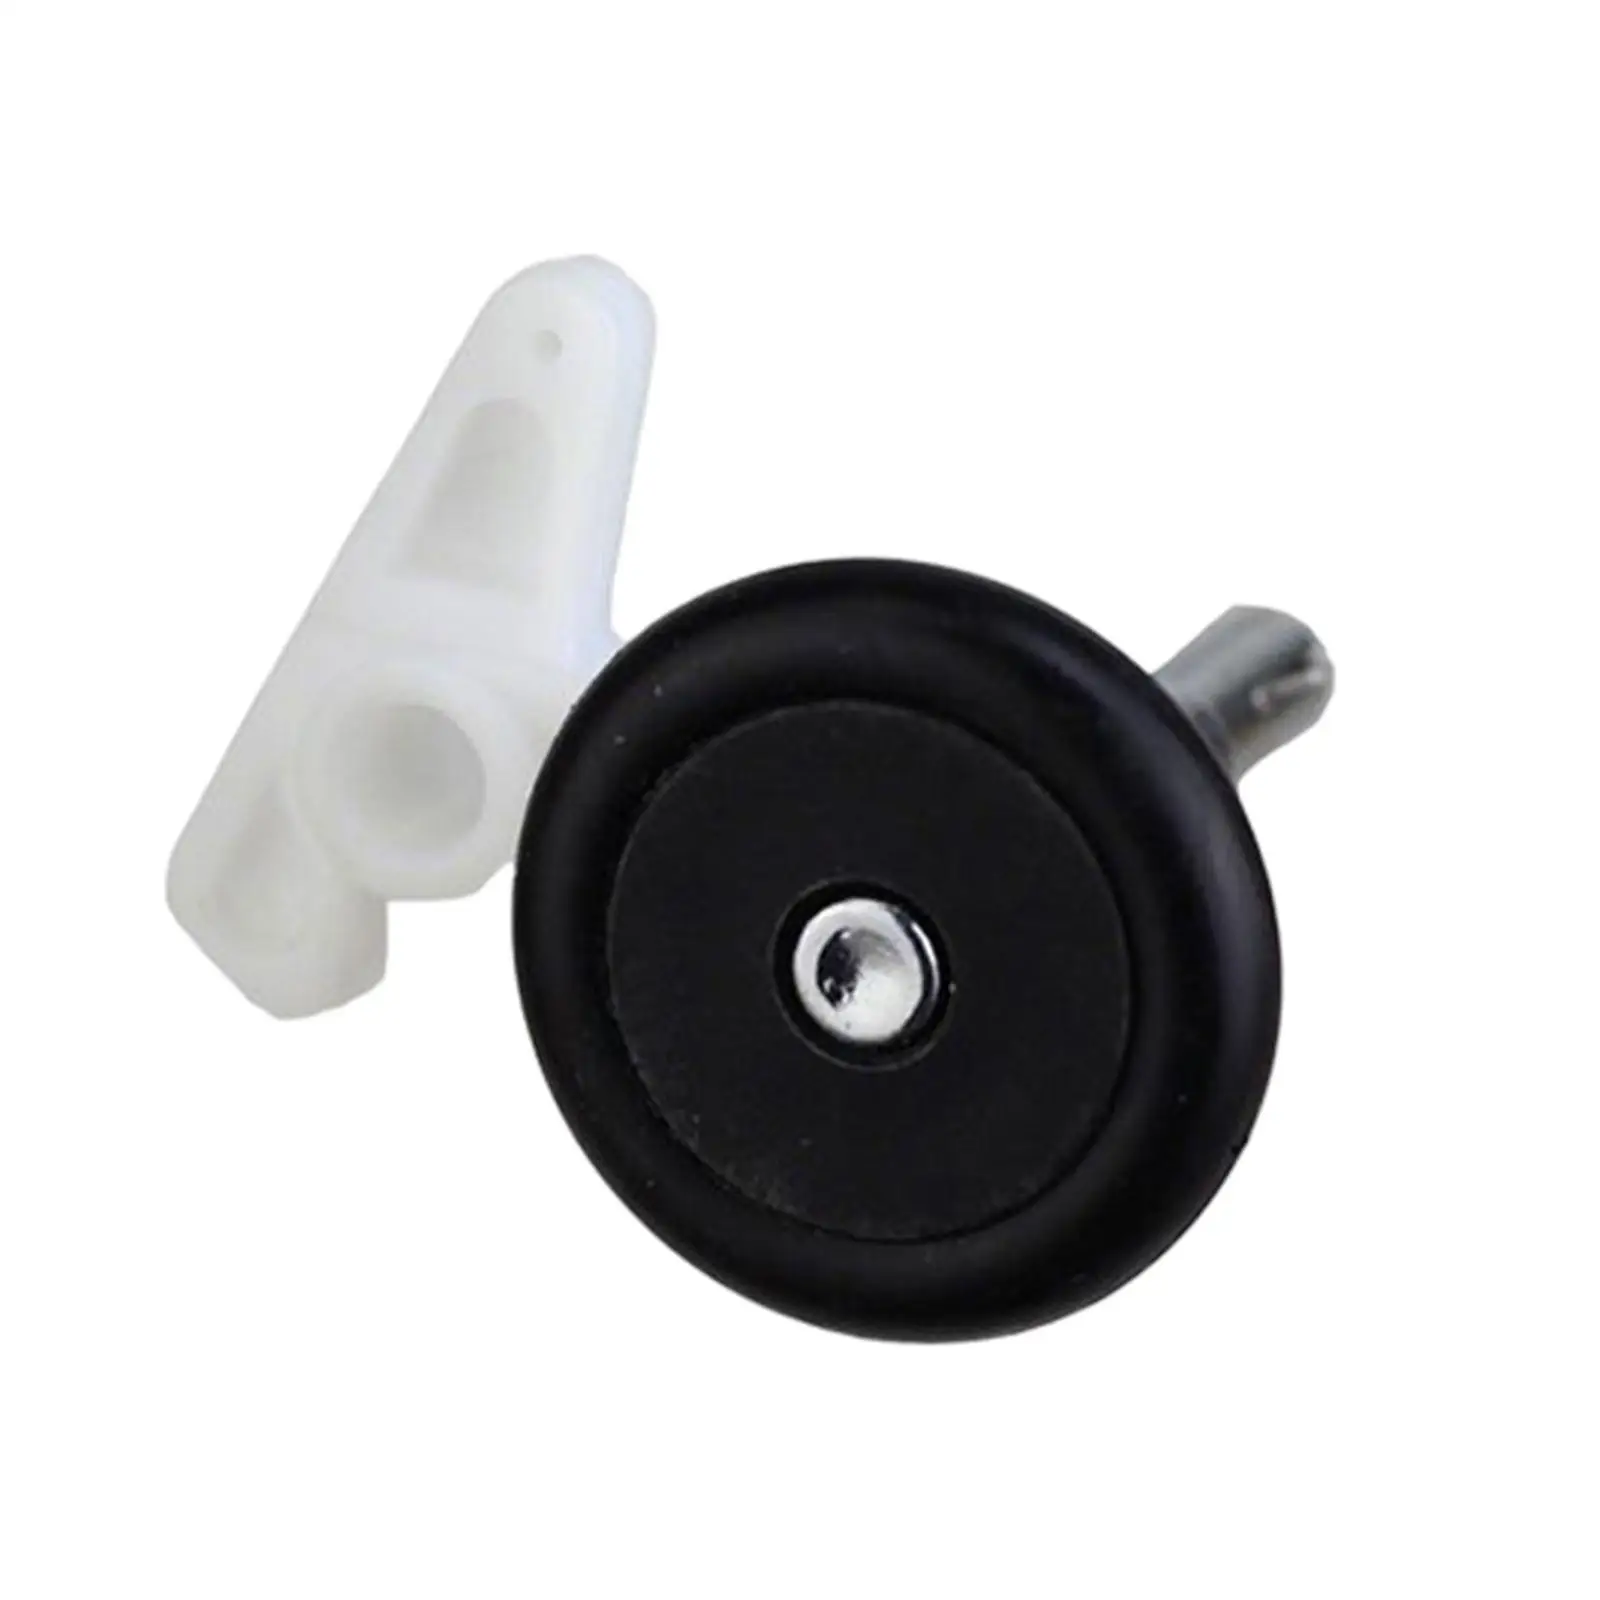 Sewing Machine Bobbin Winder Replace Home Spare Part Portable Multifunctional Gadget Attachment Steel for 1105 for 1507